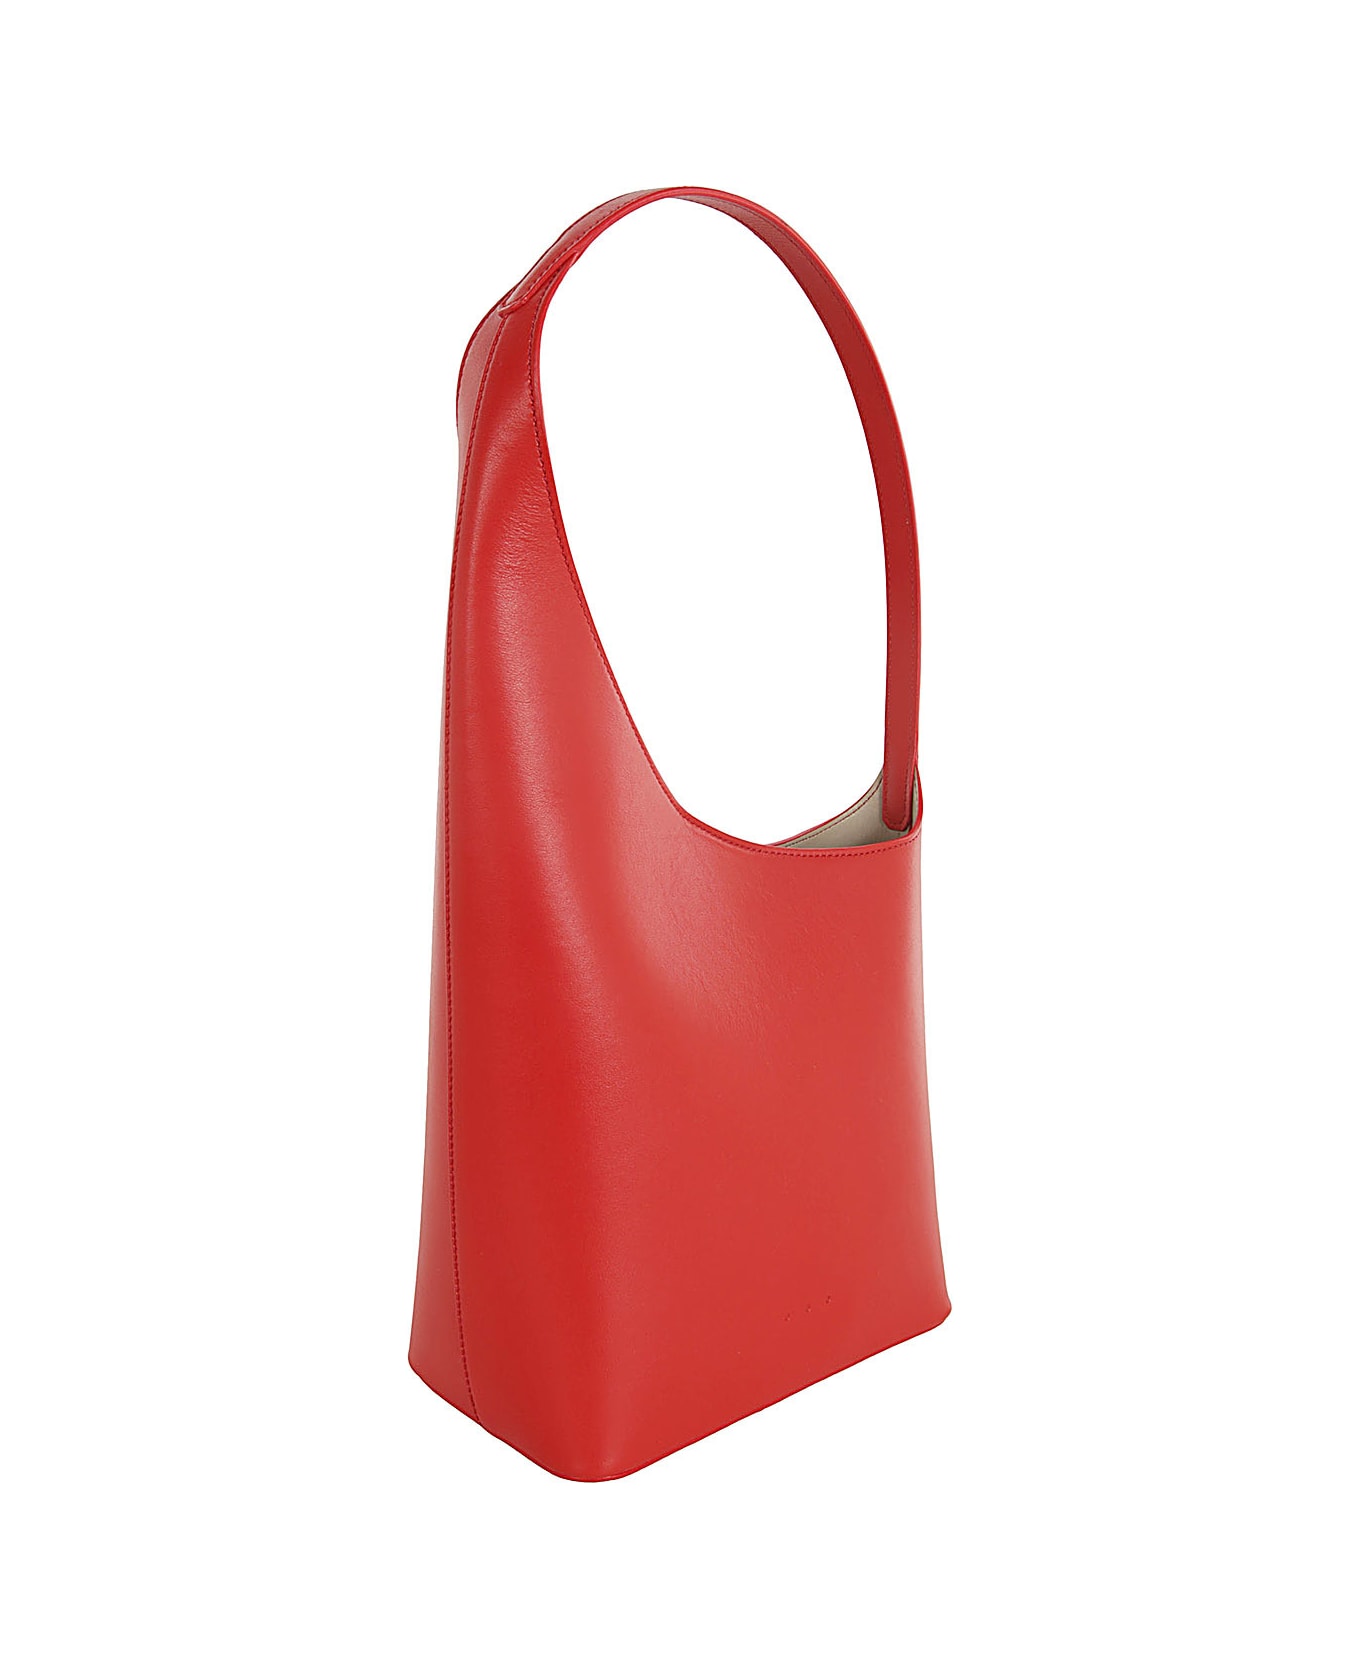 Aesther Ekme Demi Lune Tote Bag - Parrot